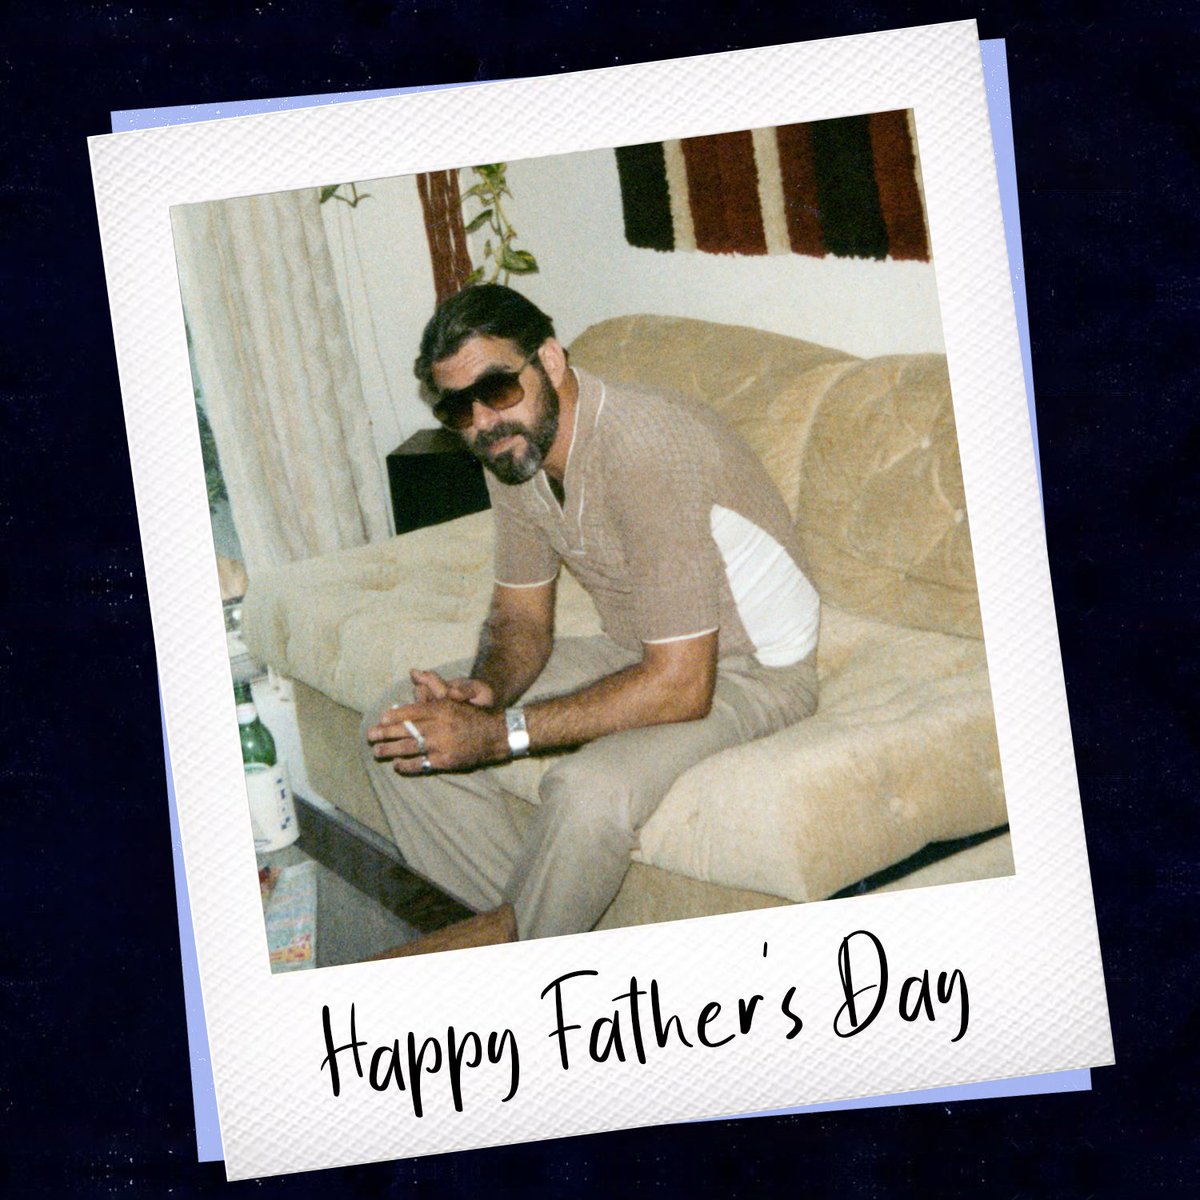 Happy Father’s Day! Dale!#HappyFathersDay2020 